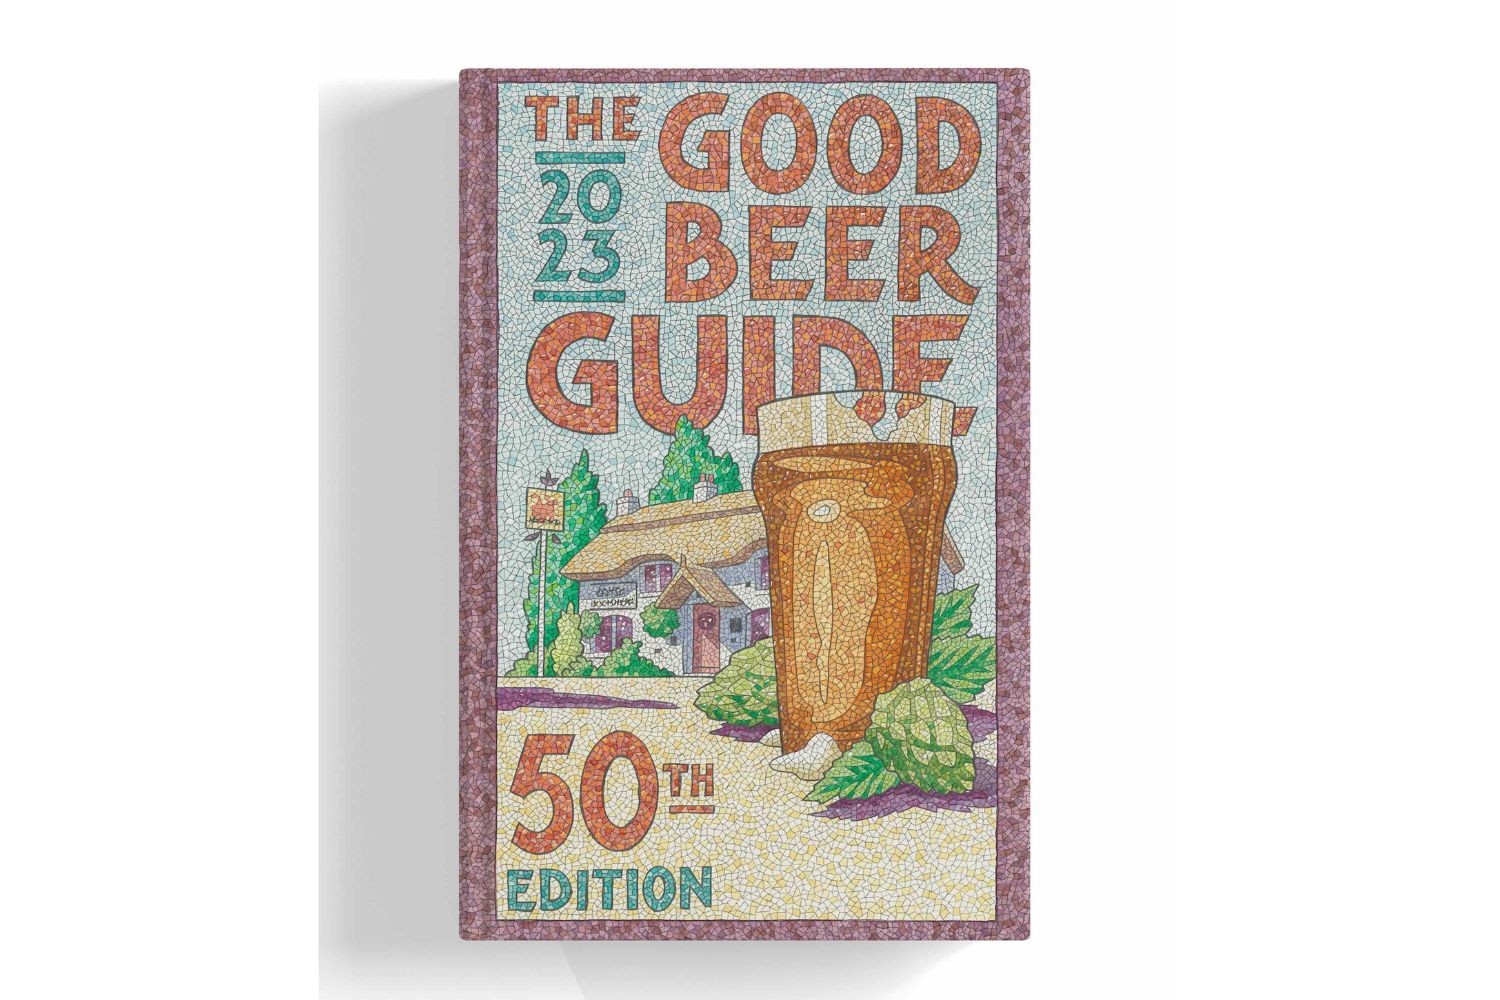 Prince of Wales to write foreword for Good Beer Guide thumbnail